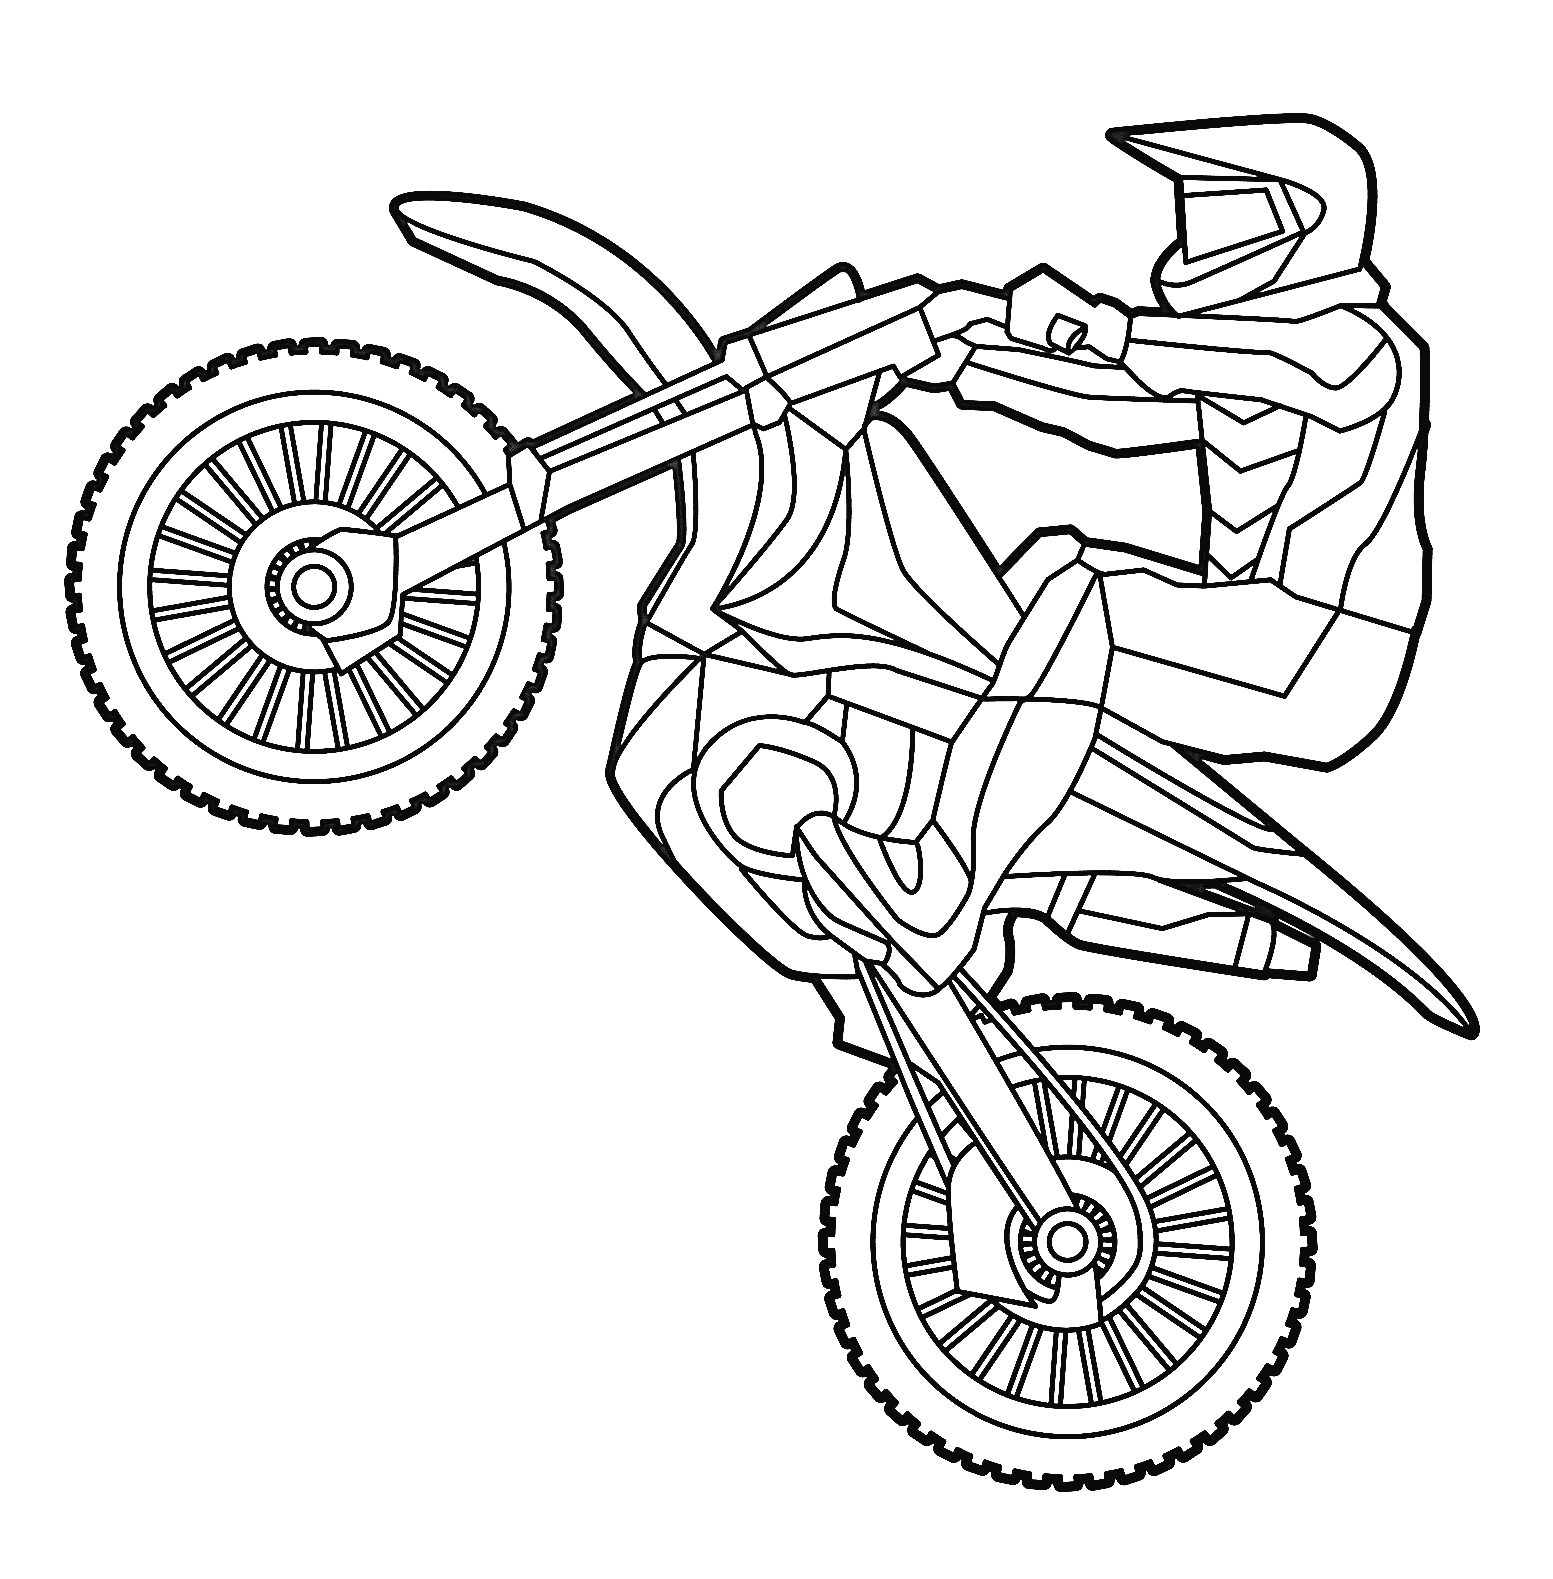 Dirt Bike Coloring Page Page For Kids And Adults - Coloring Home